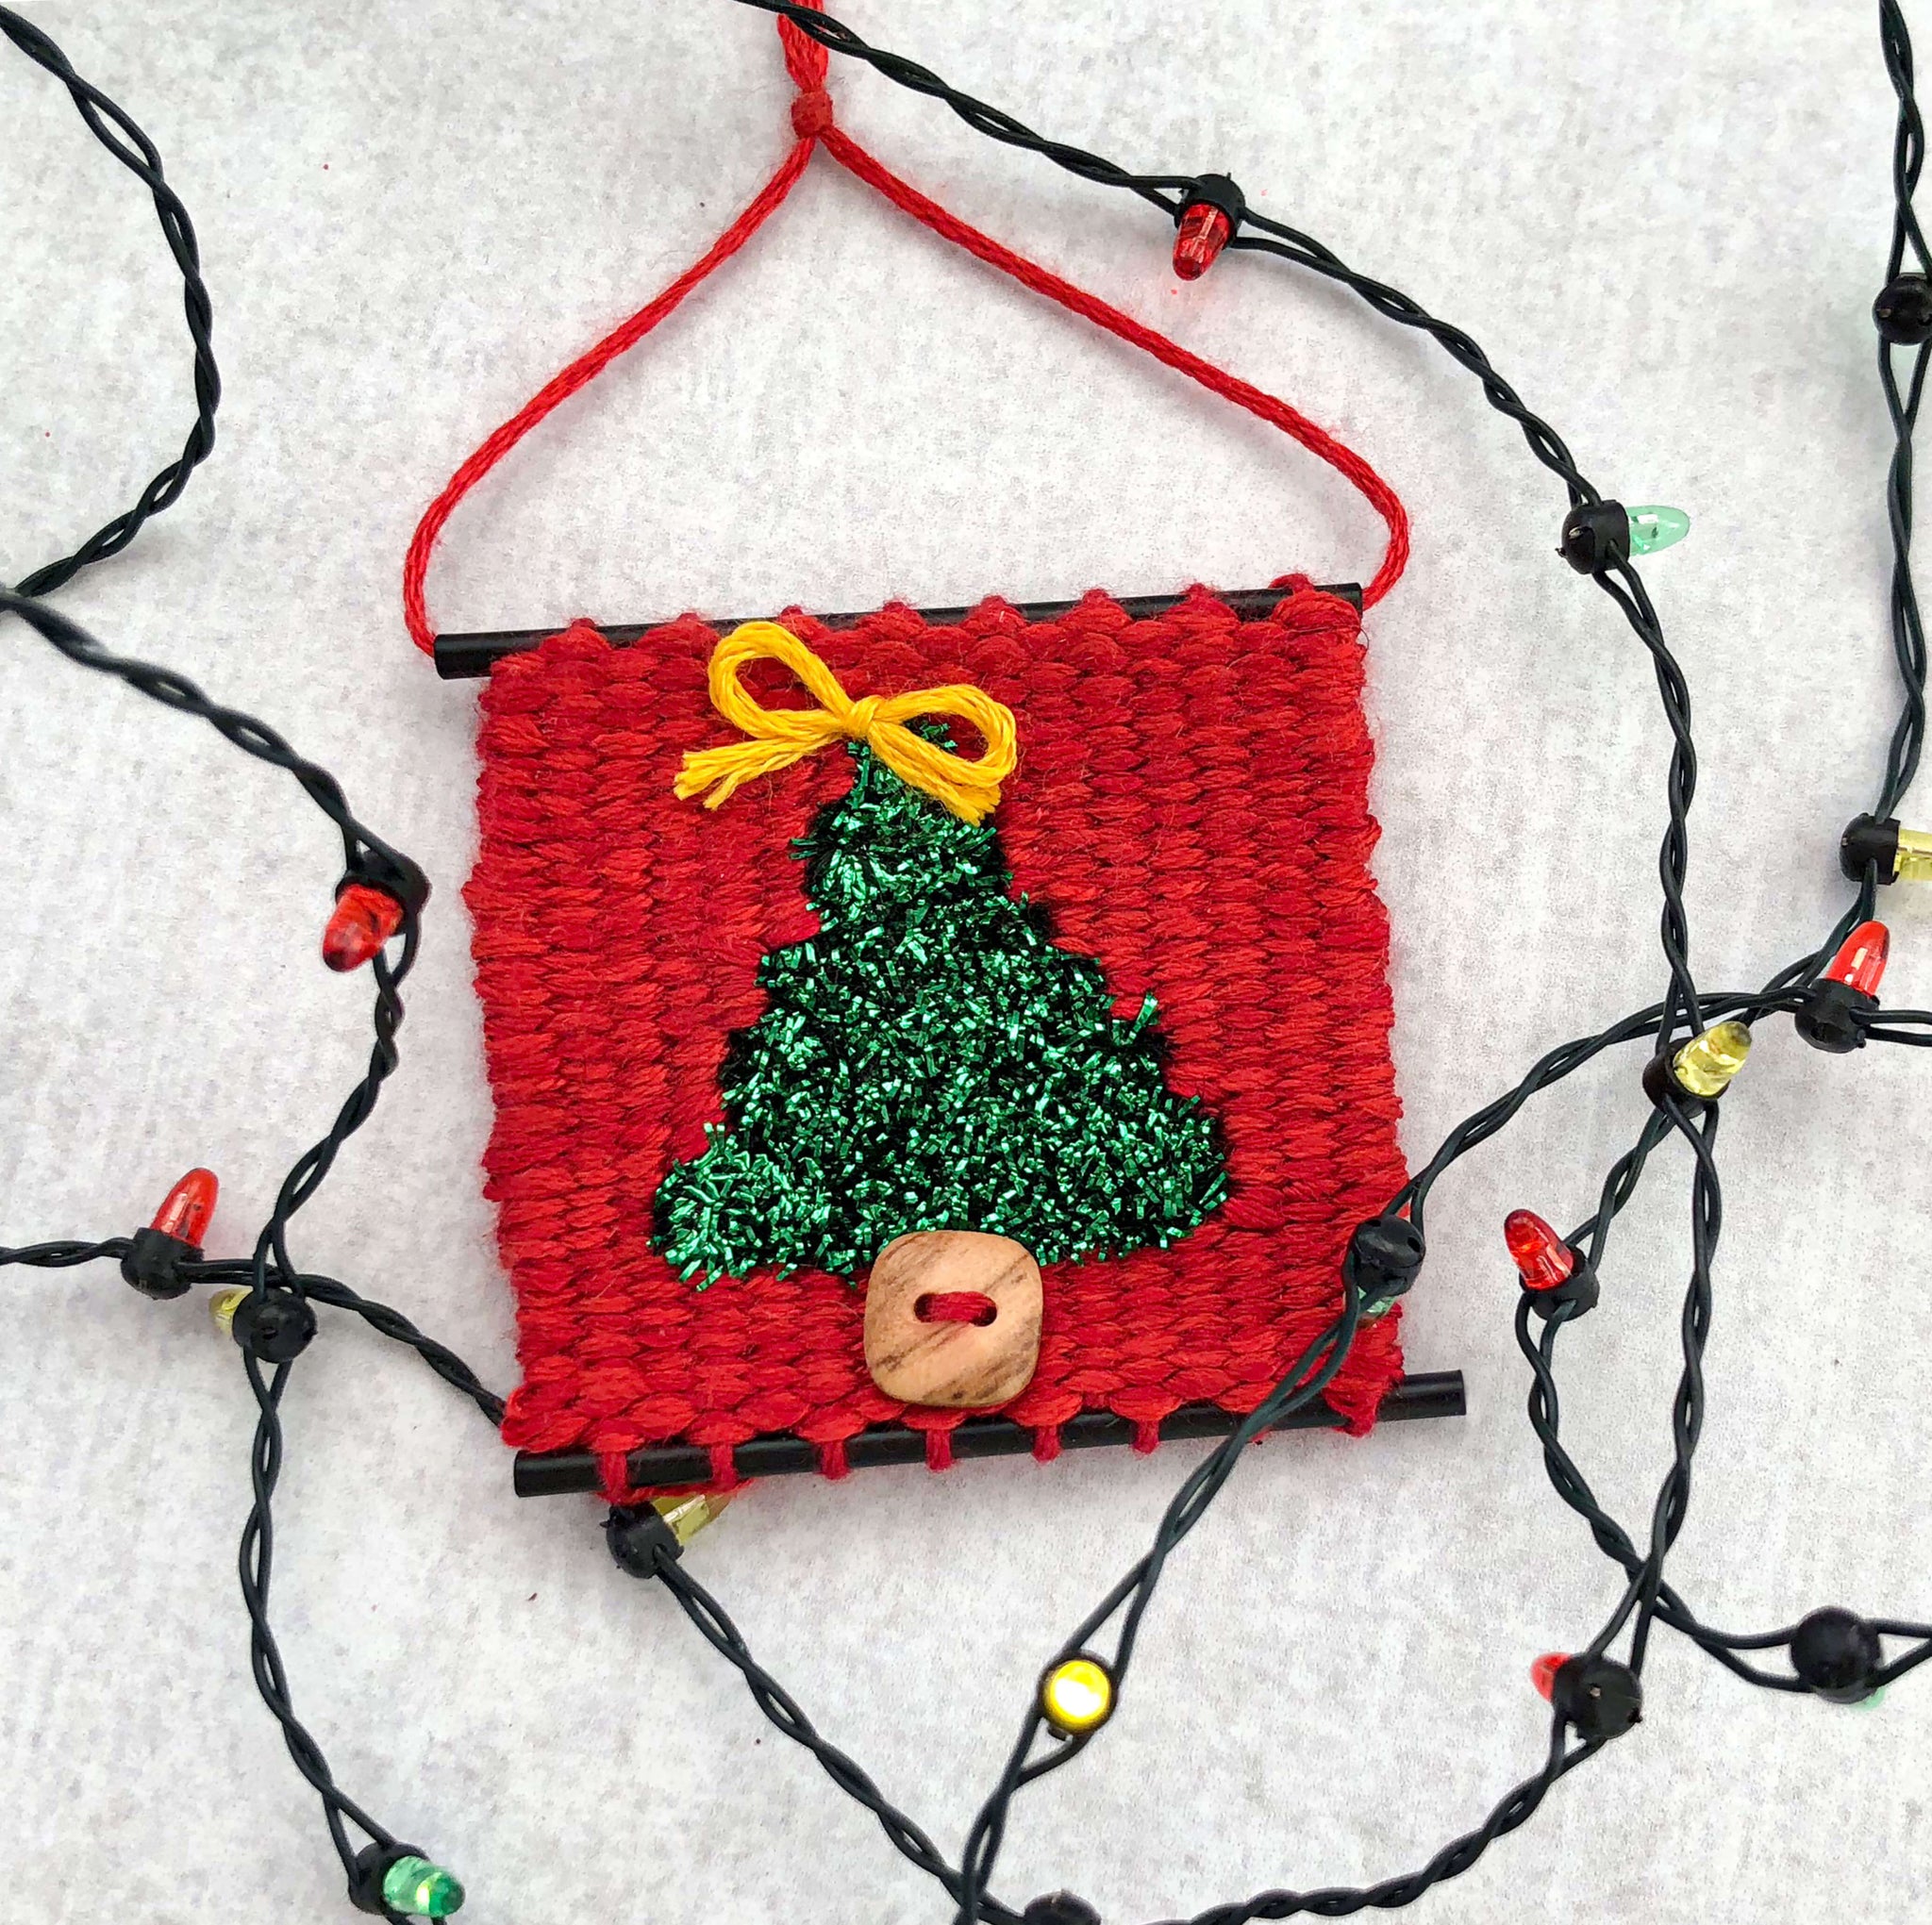 Tiny Loom Kit- Handwoven Christmas Tree Ornament Kit - The Creativity Patch  - Lucy Jennings